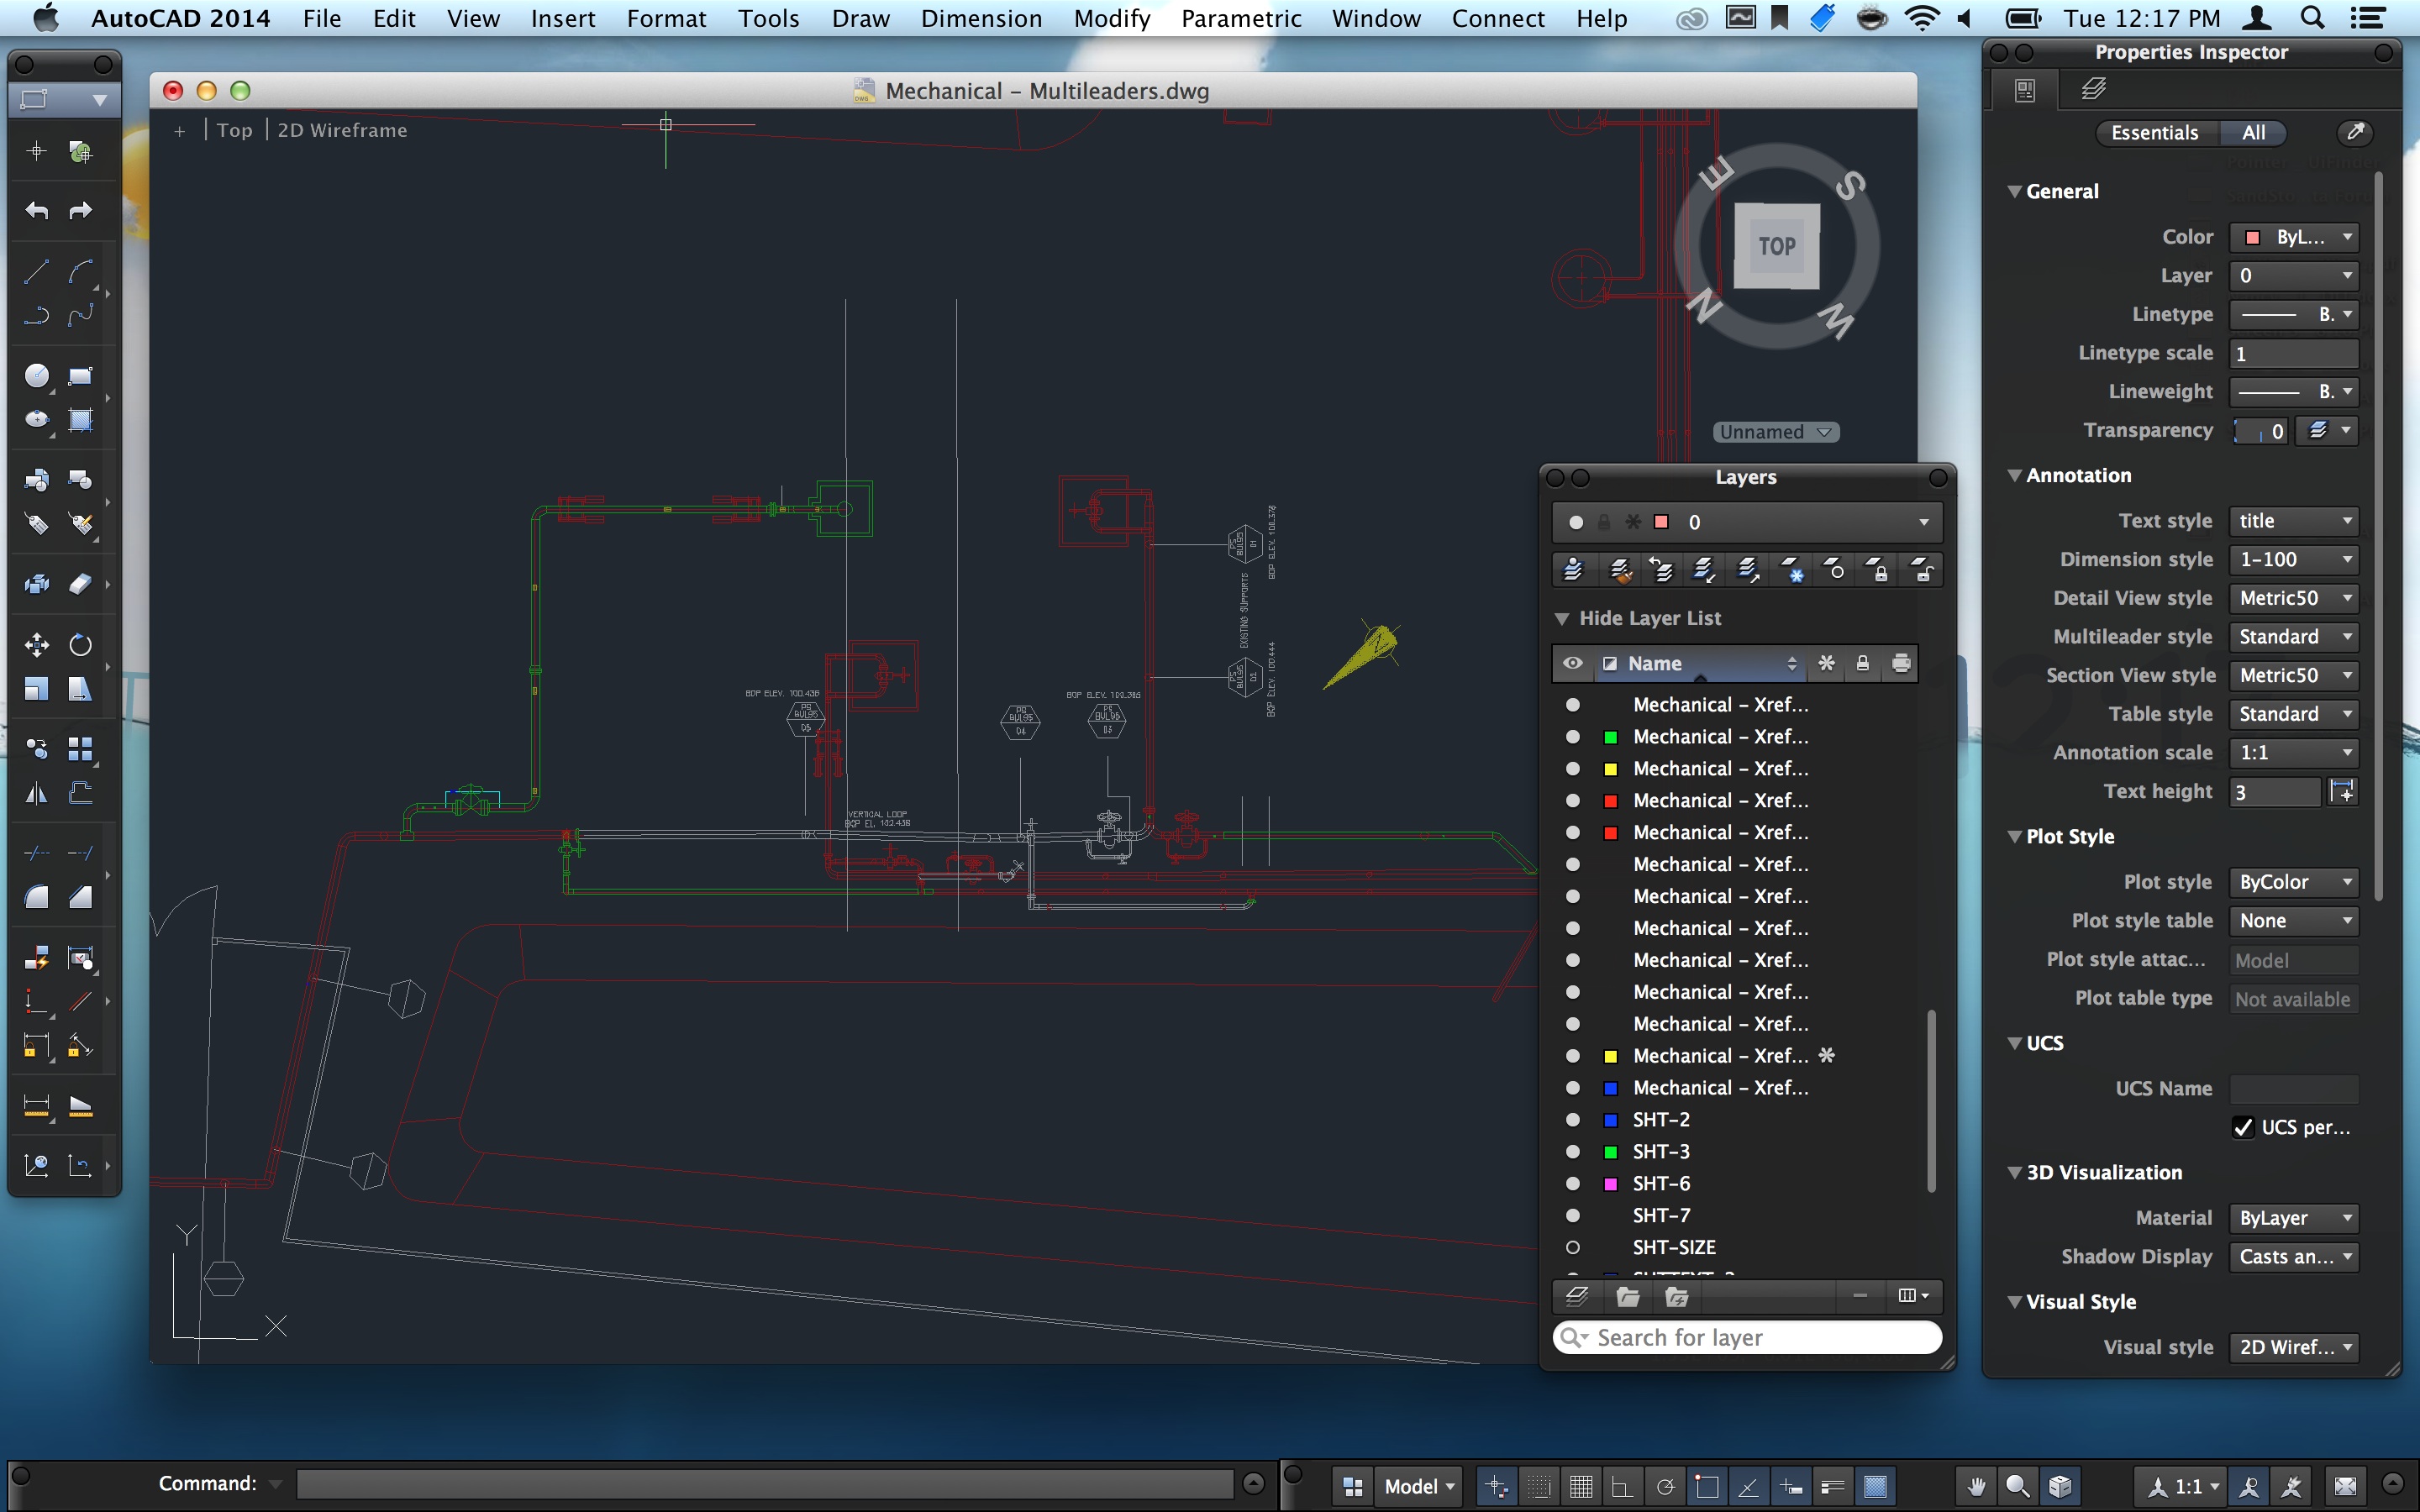 56 Creative Autocad design review 2014 free download for Ideas